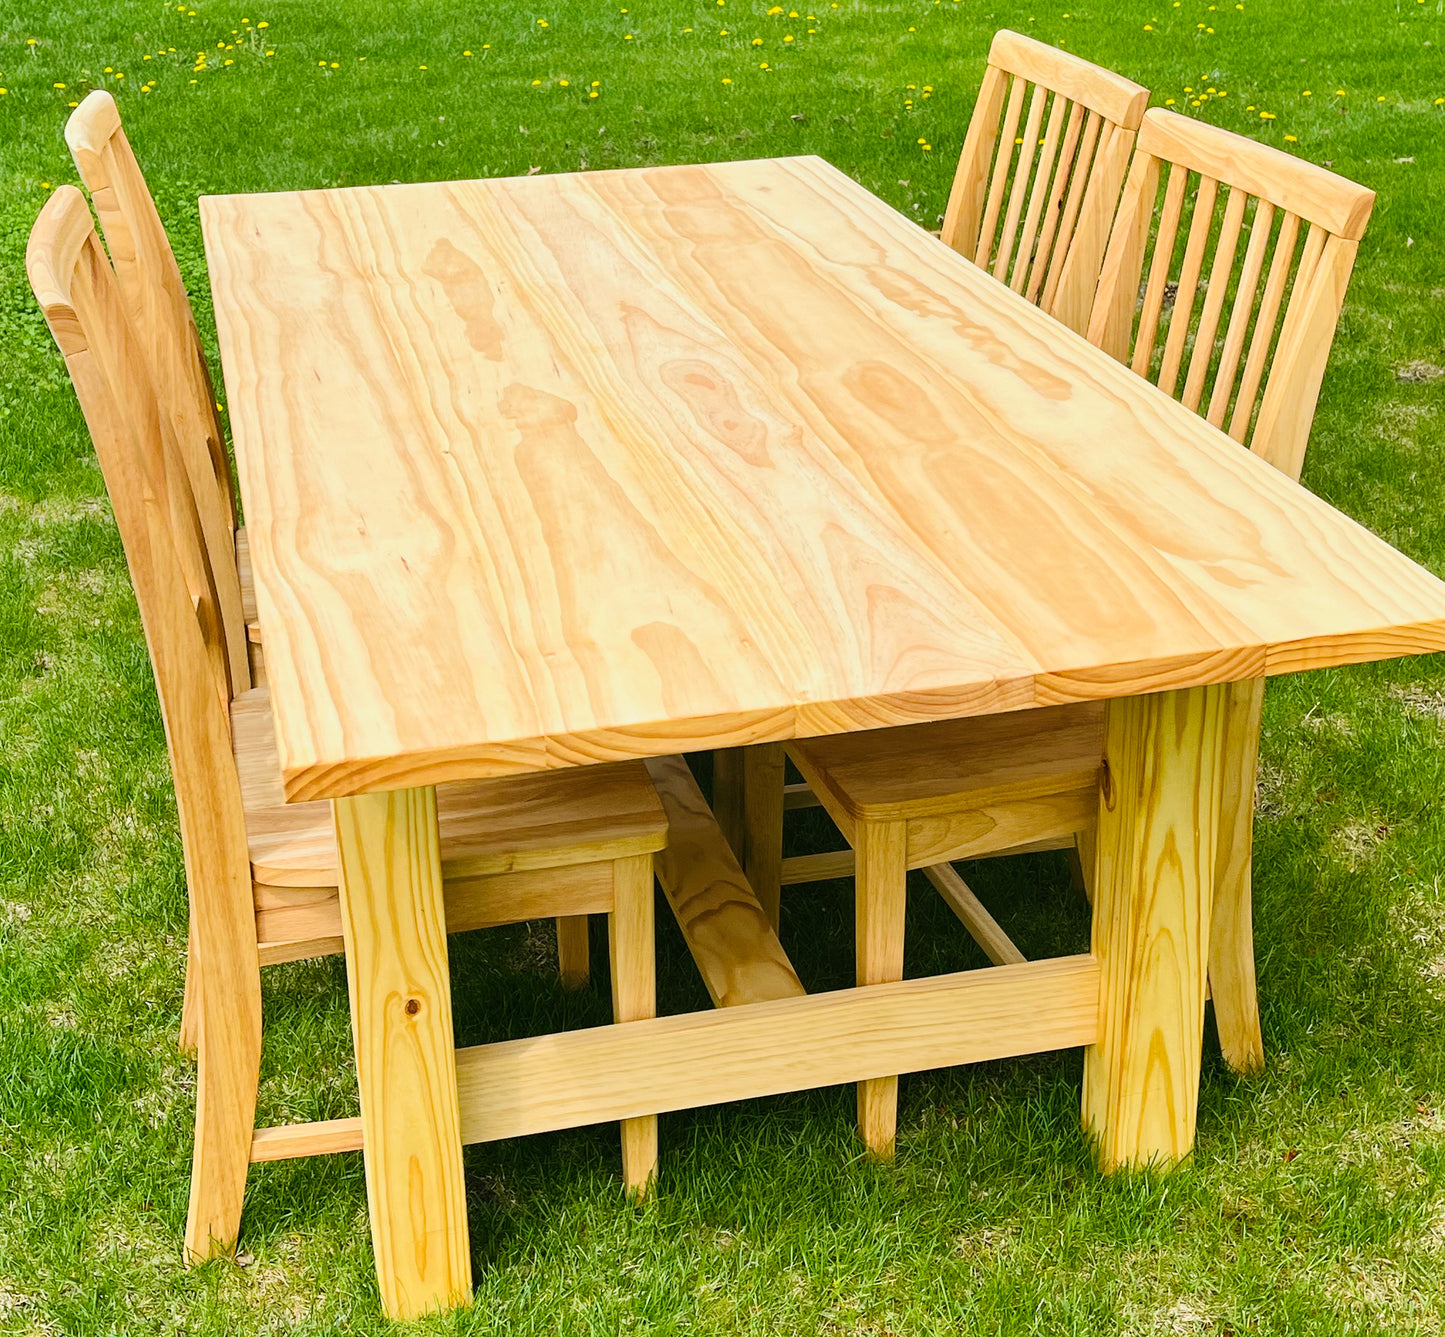 The Midwestern Farmhouse Table